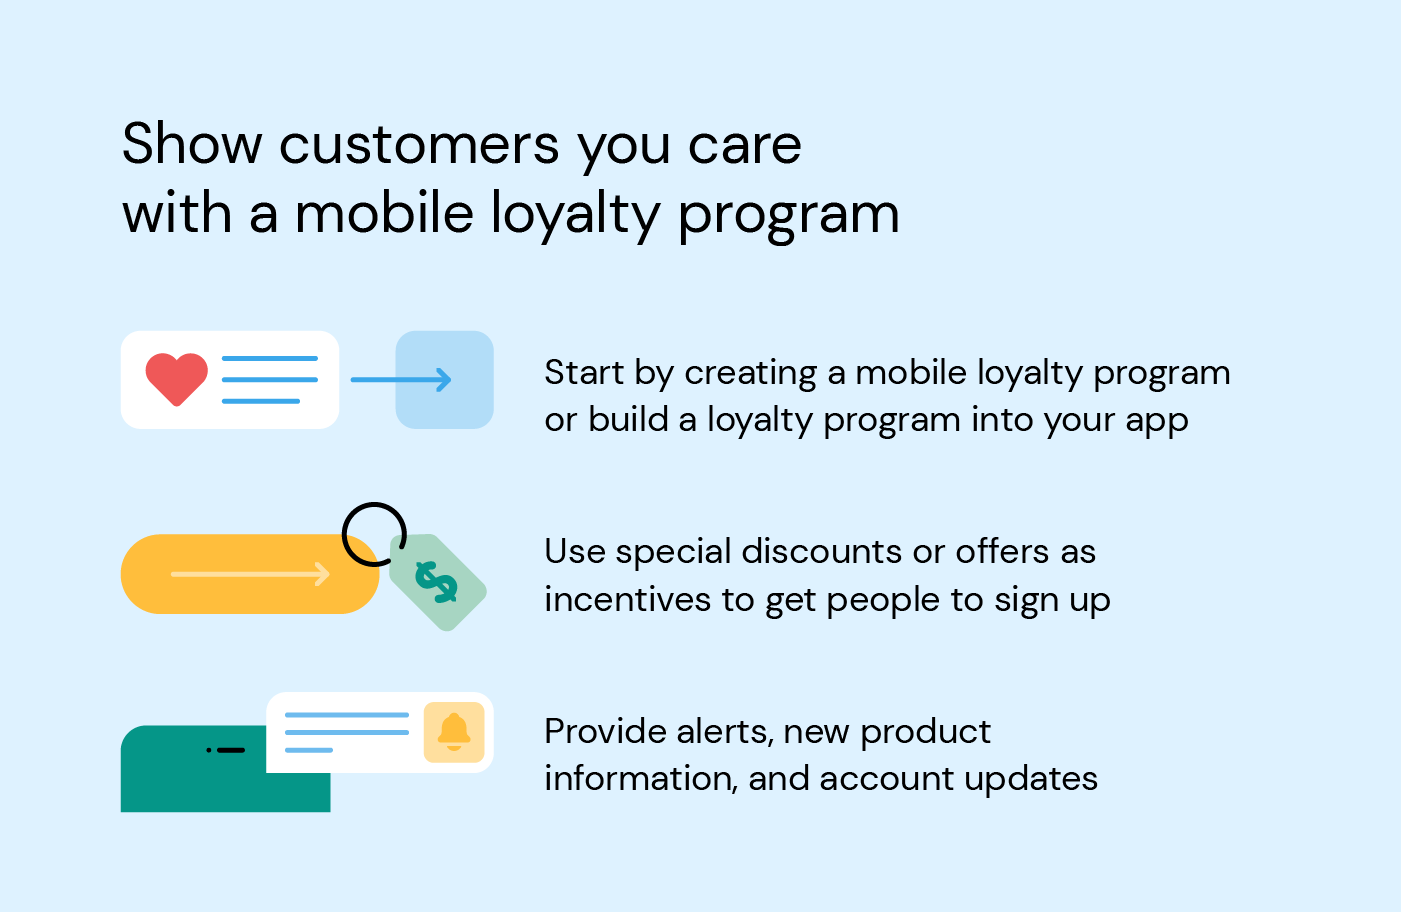 Illustration shows how to build a customer loyalty program through mobile